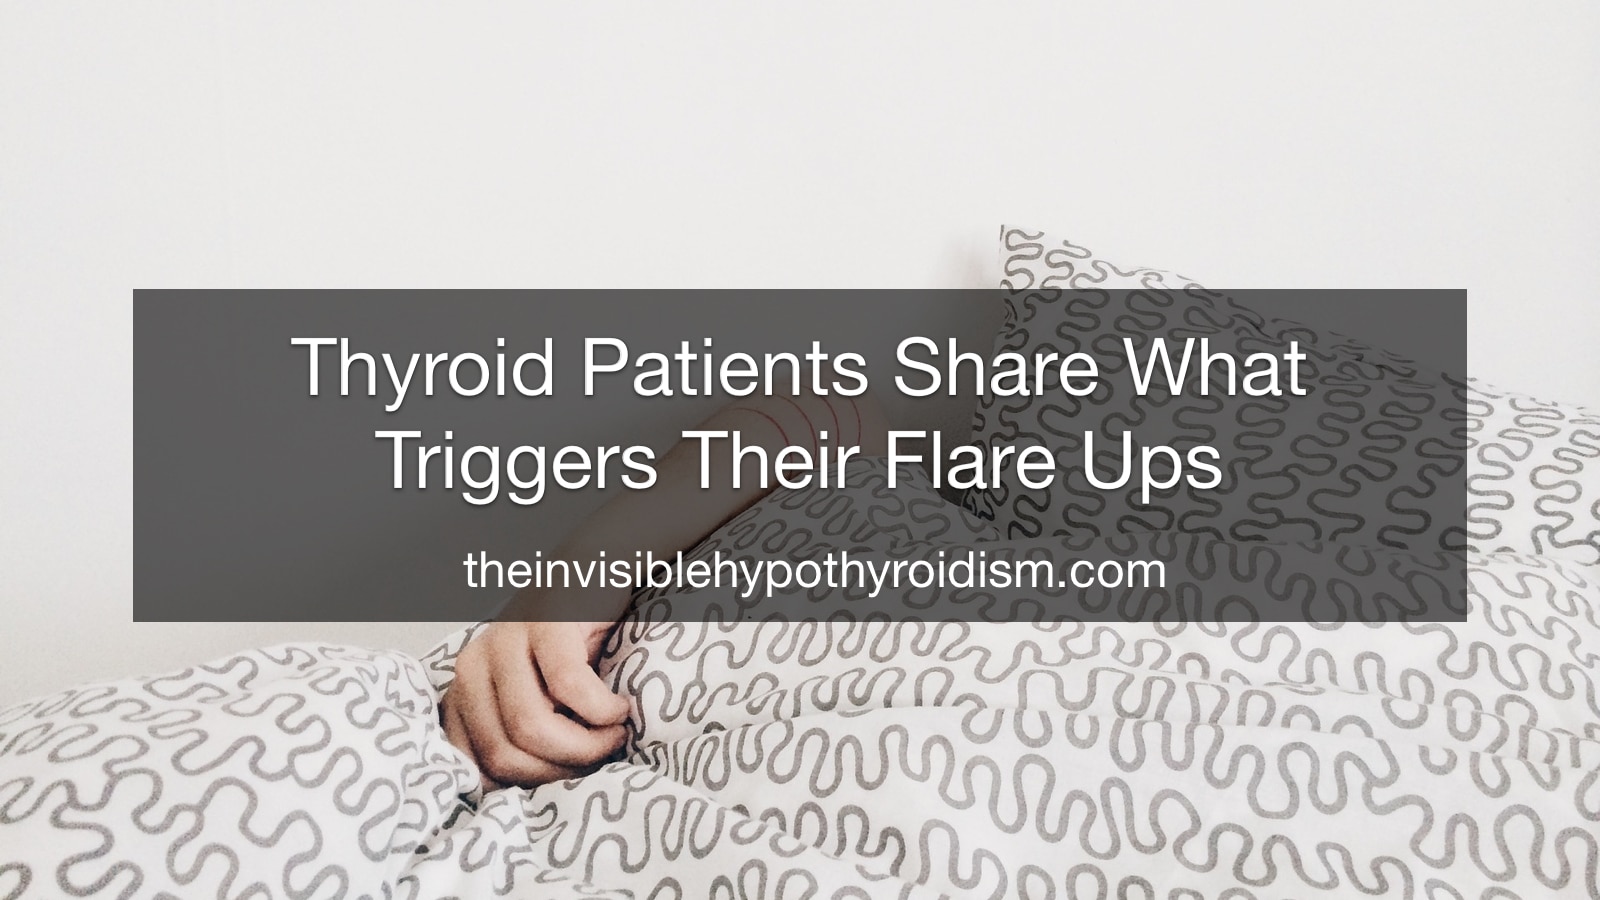 Thyroid Patients Share What Triggers Their Flare Ups